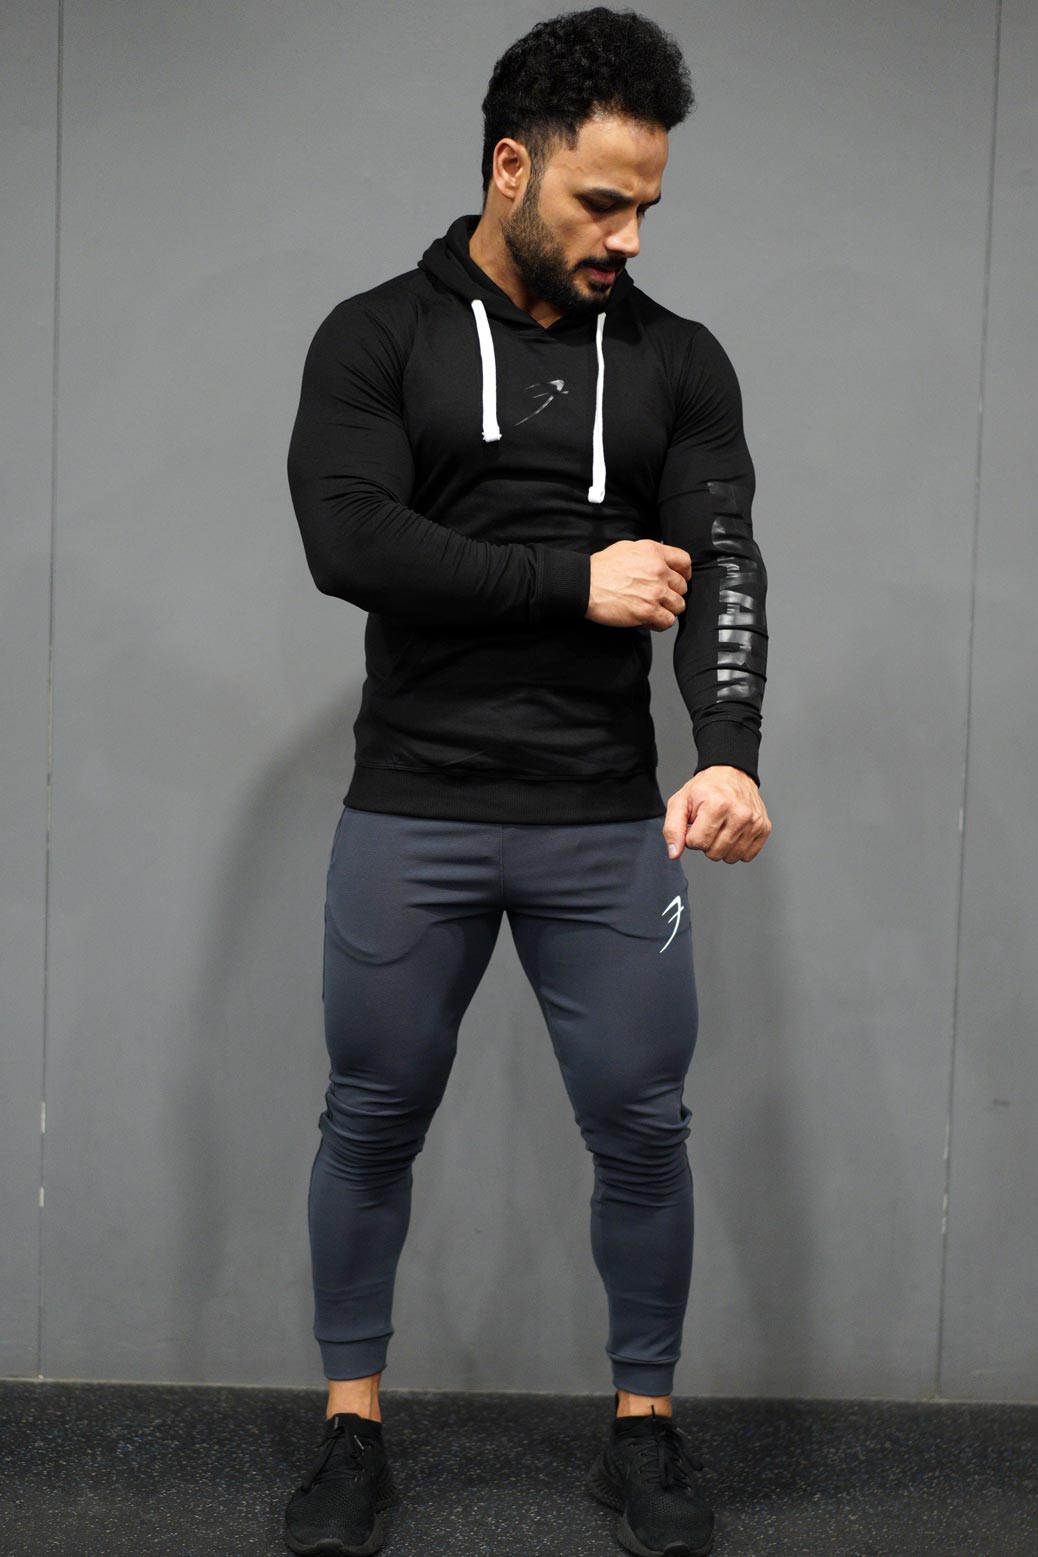 Fuaark Gym Compression Grey Tights  Buy Tights For Men Online in New  Zealand